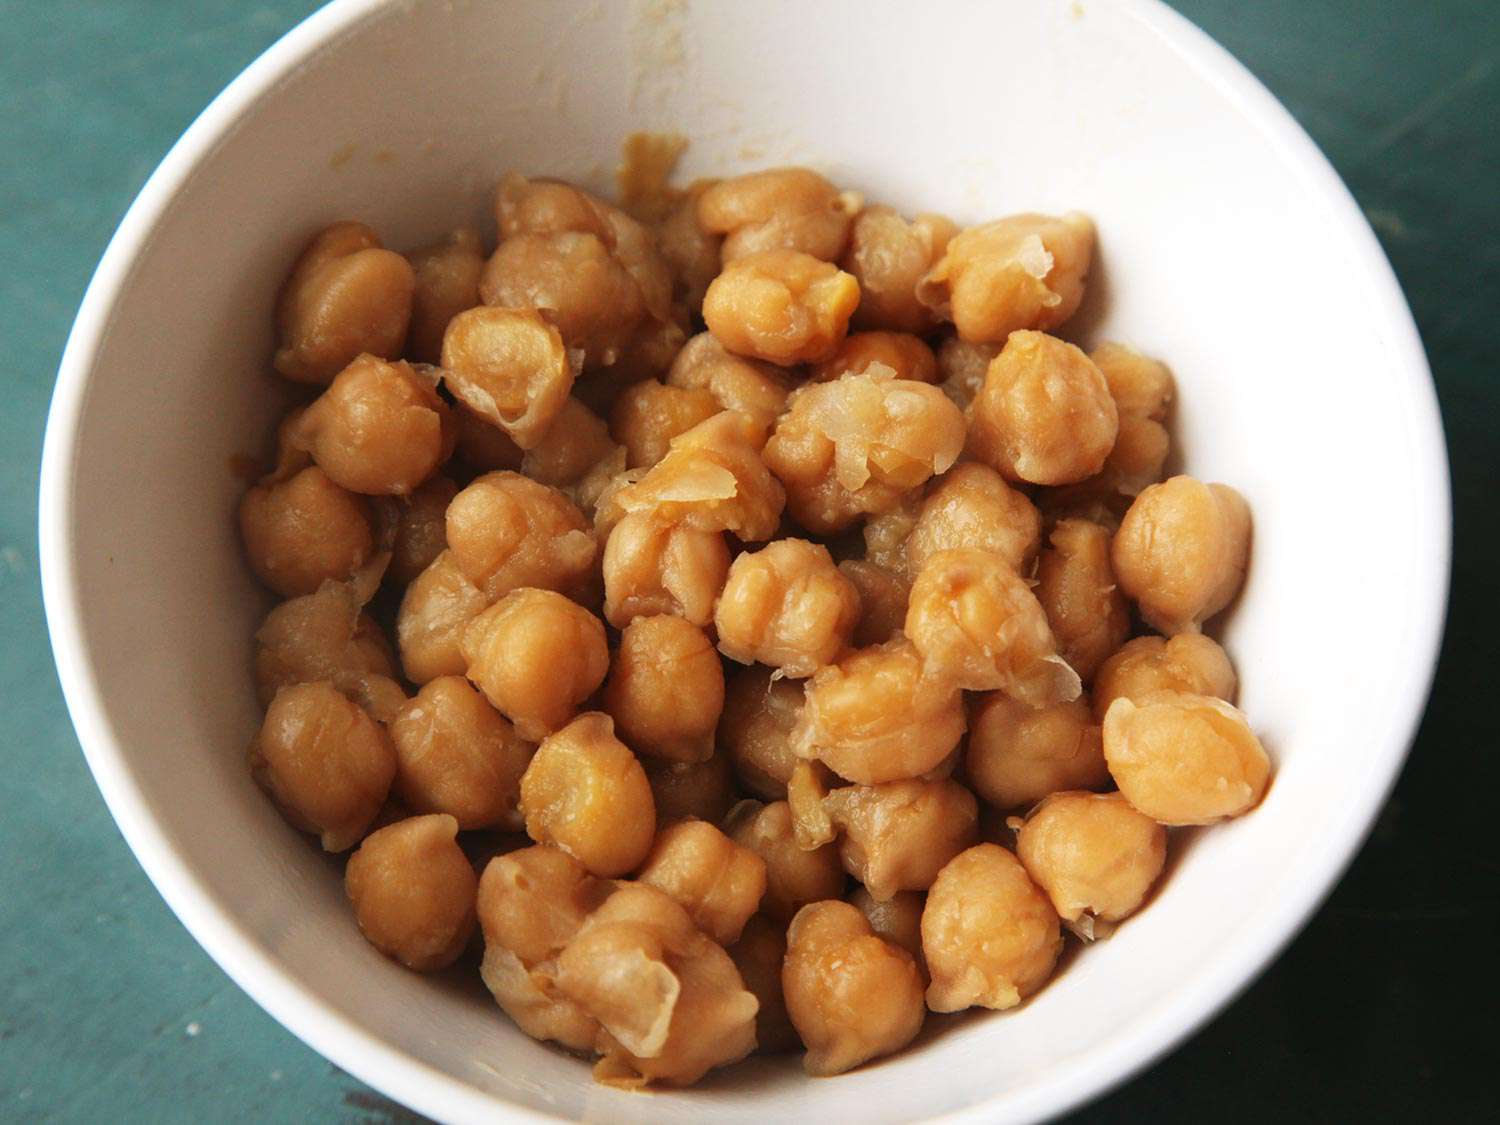 A white bowl of thoroughly cooked, falling-apart chickpeas